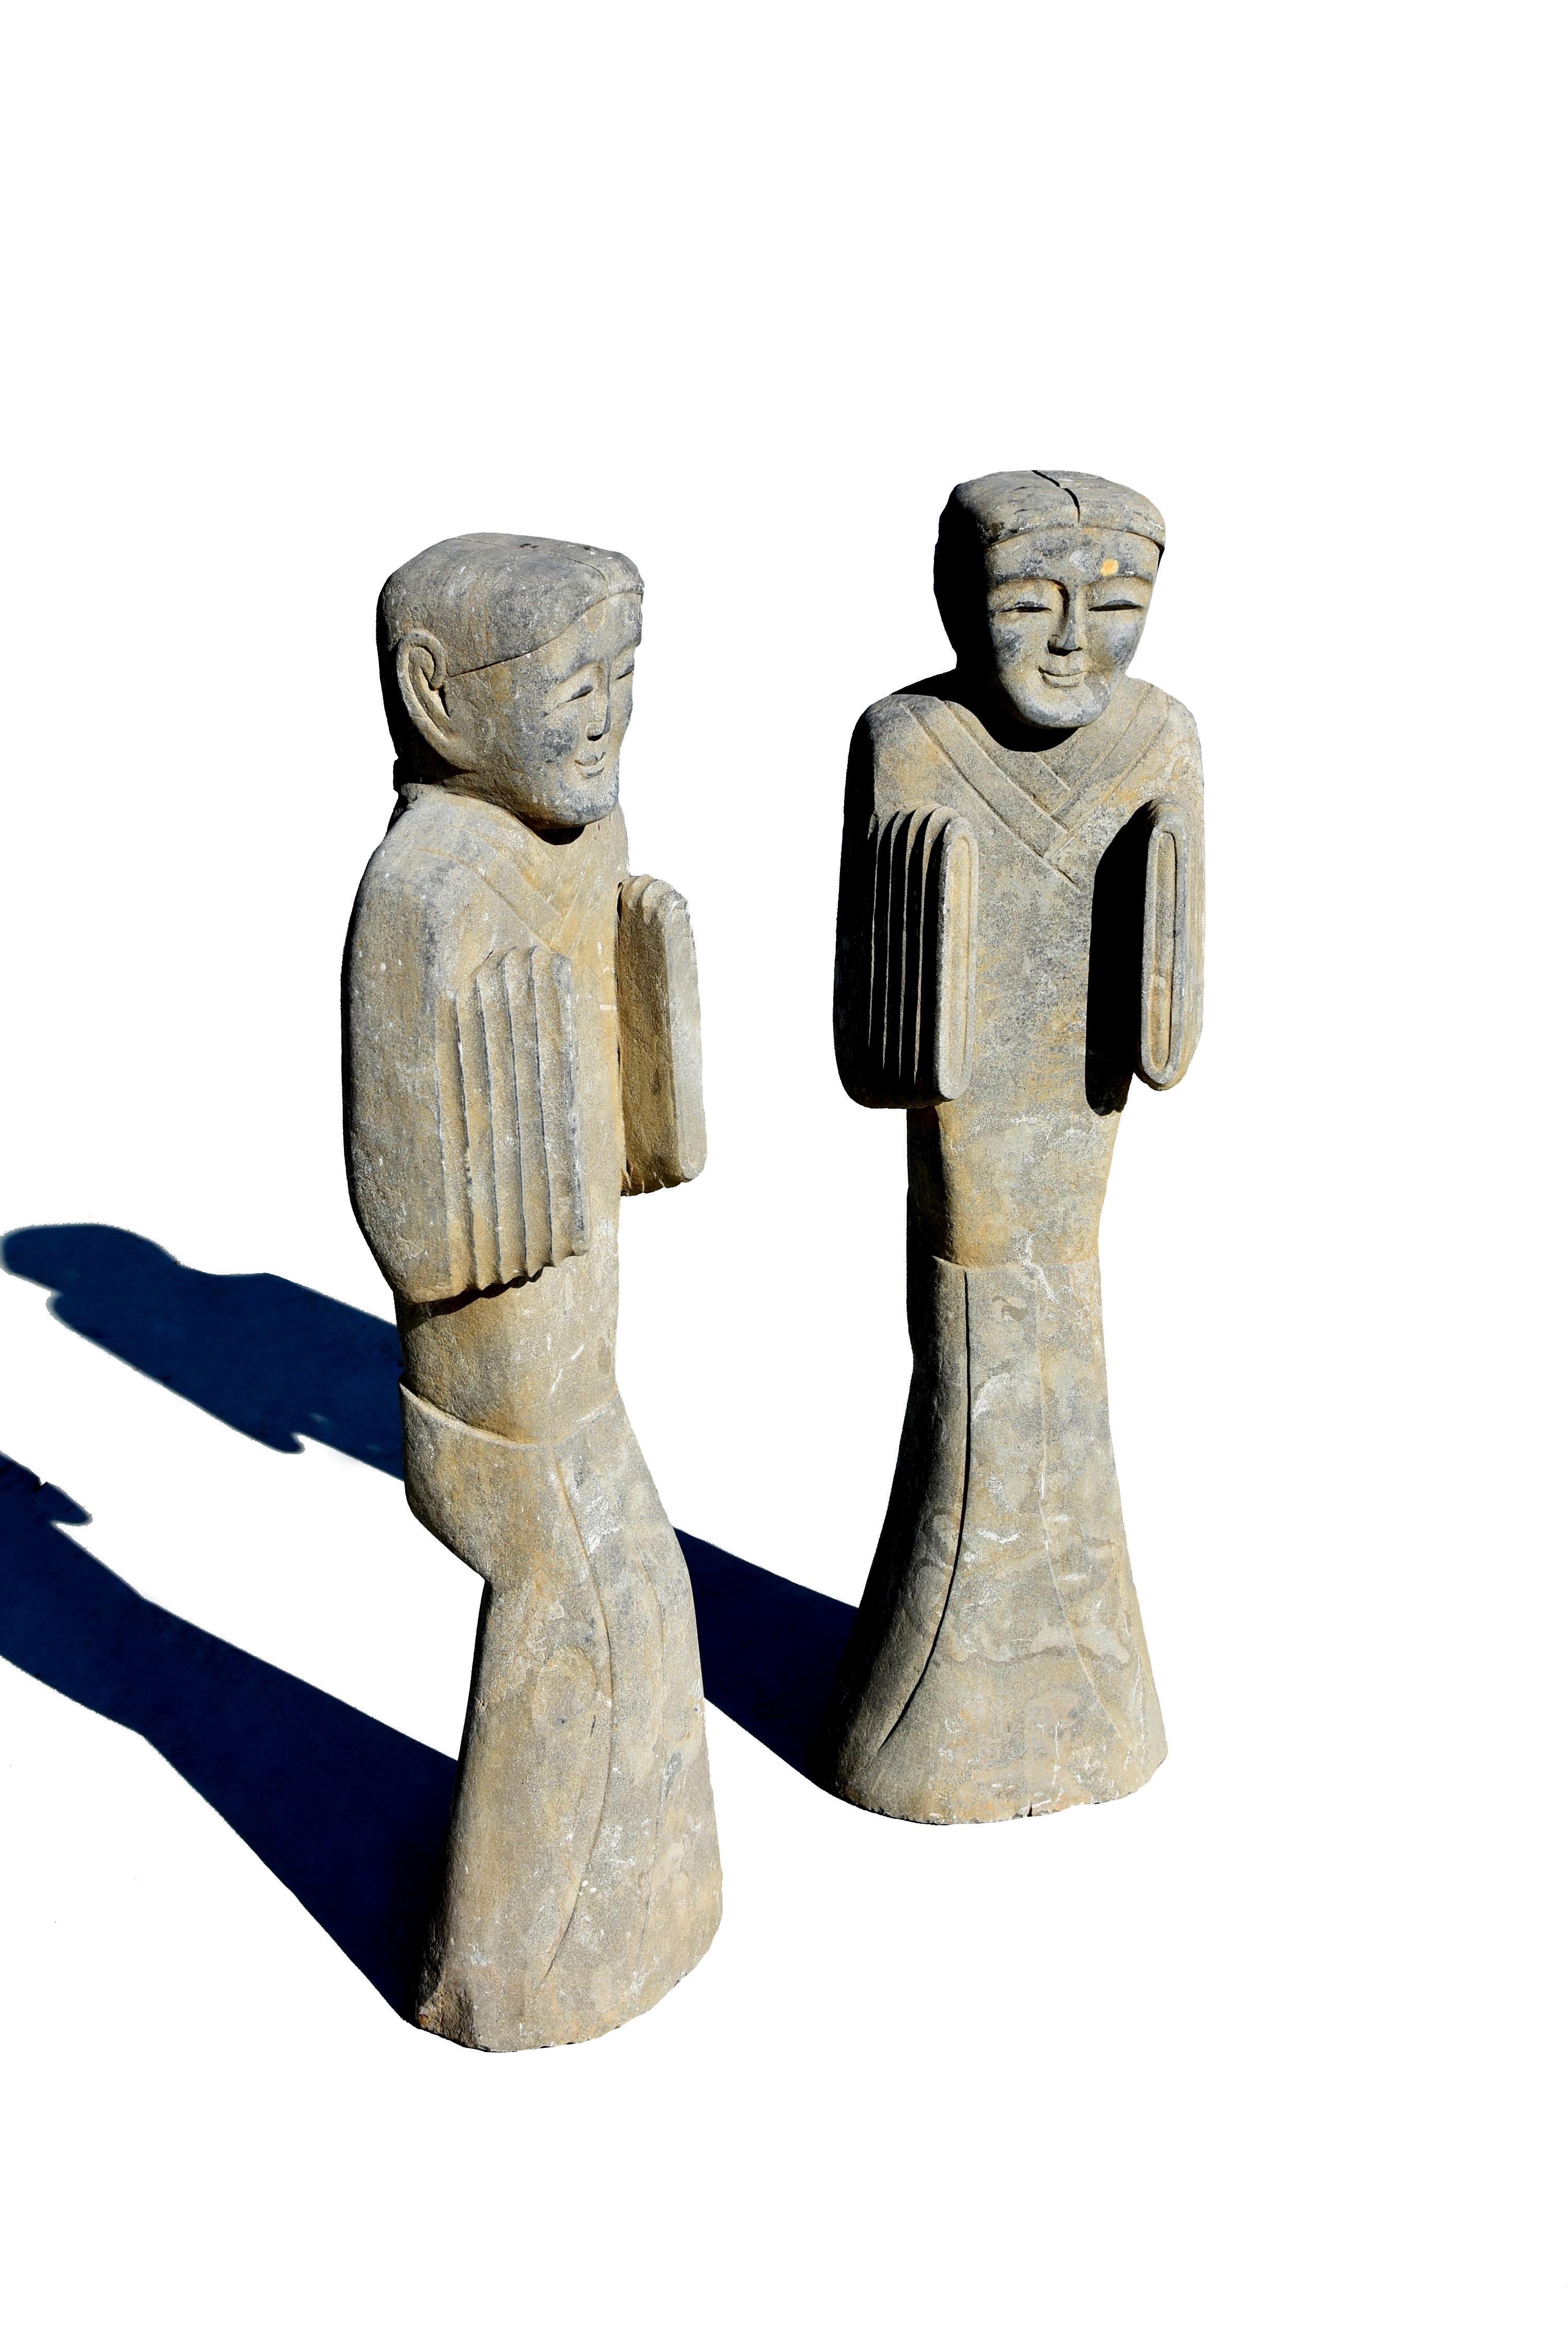 A pair of vintage solid stone court attendants. Of tall slender form, wearing long flowing robes flaring at the bottom with hands within wide, decorative cuffs. The realistically modelled face with serene expression is with large, kind eyes under